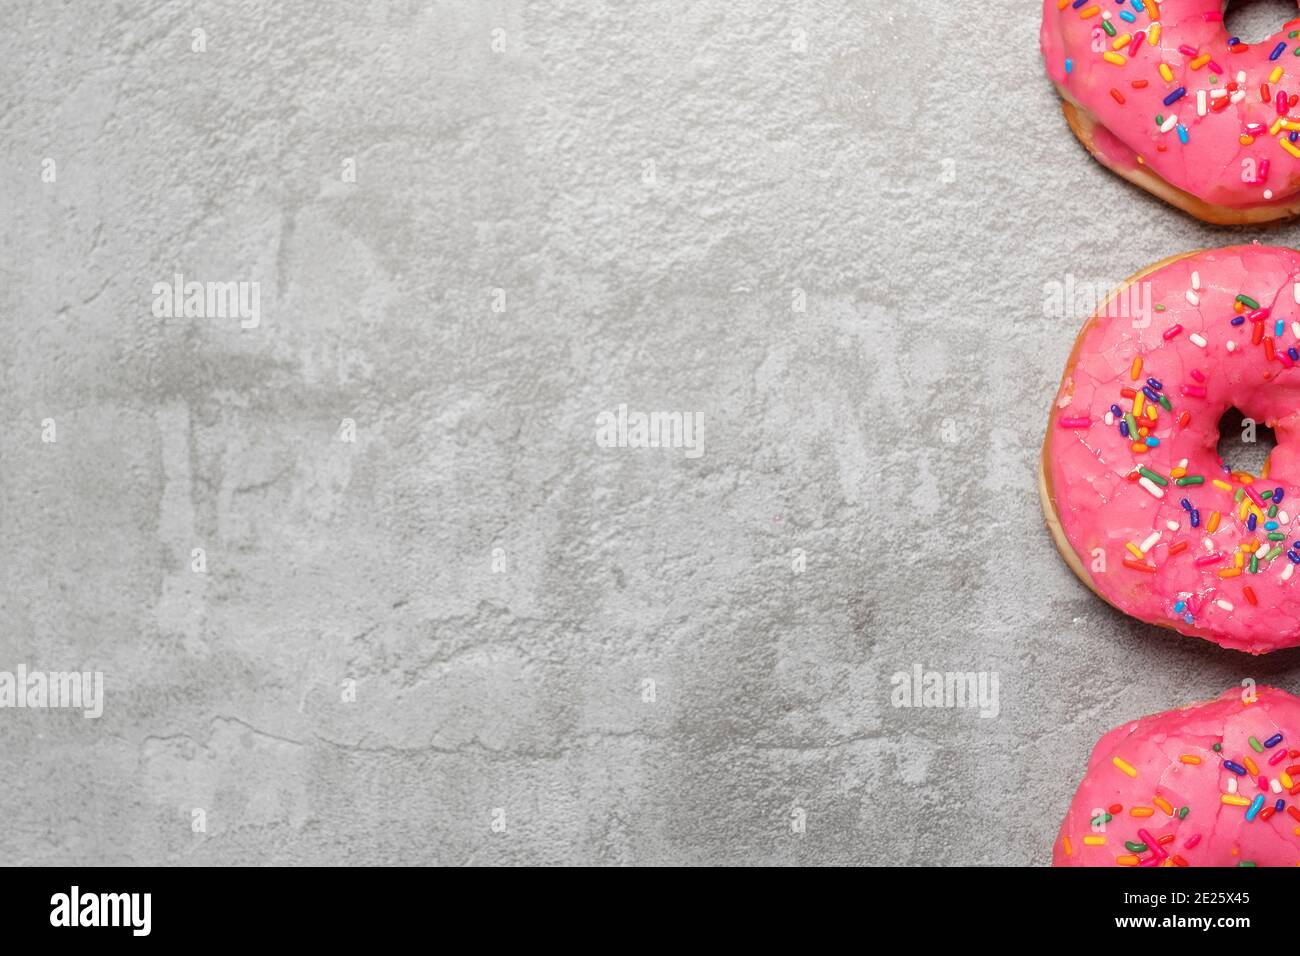 Border of three pink donuts doughnuts with sprinkles on a grey concrete surface with copy space and room for text Stock Photo